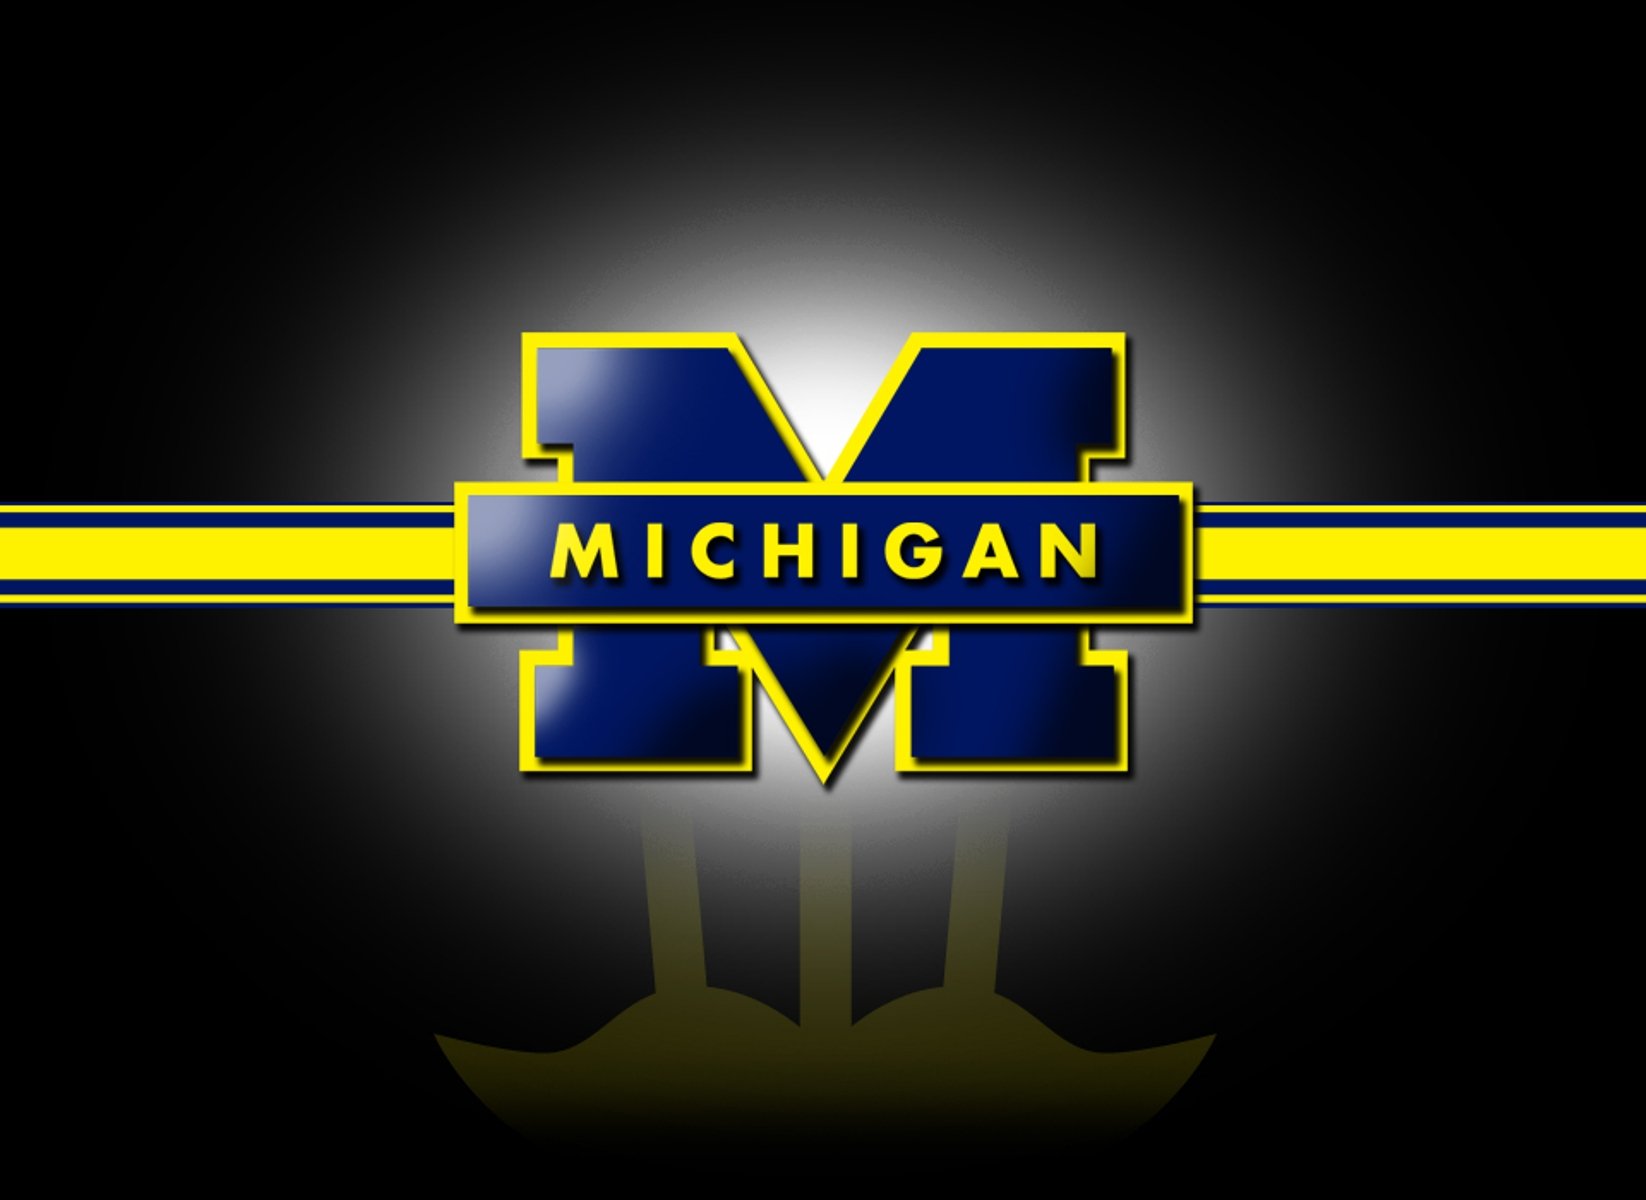 MICHIGAN WOLVERINES college football by wallpaperupcom